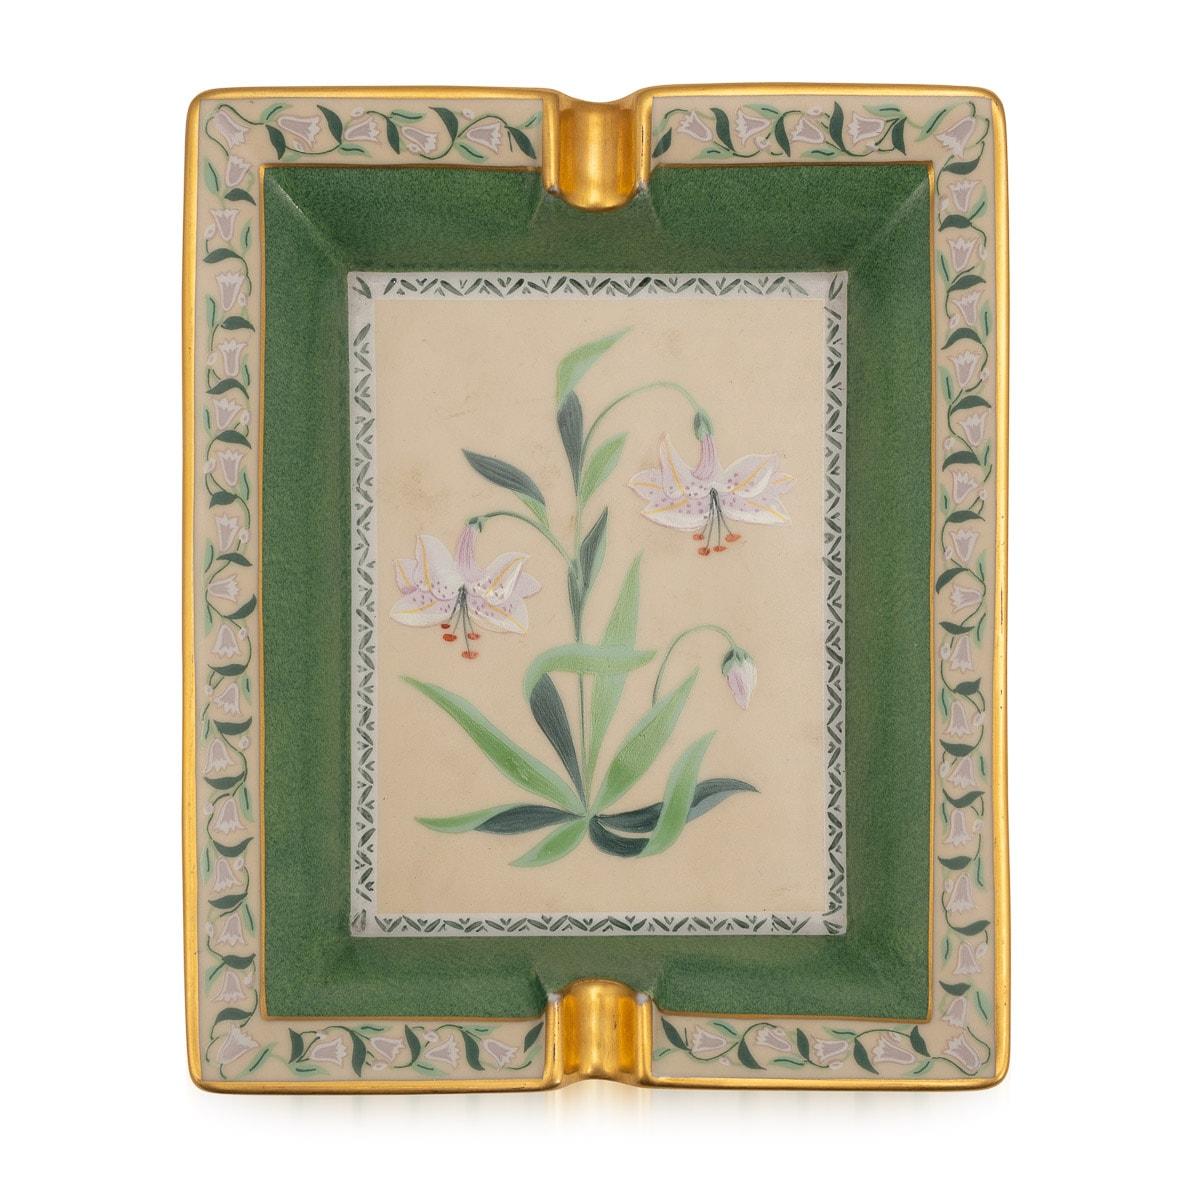 20th Century French Ceramic Ash Tray By Hermes In Good Condition For Sale In Royal Tunbridge Wells, Kent